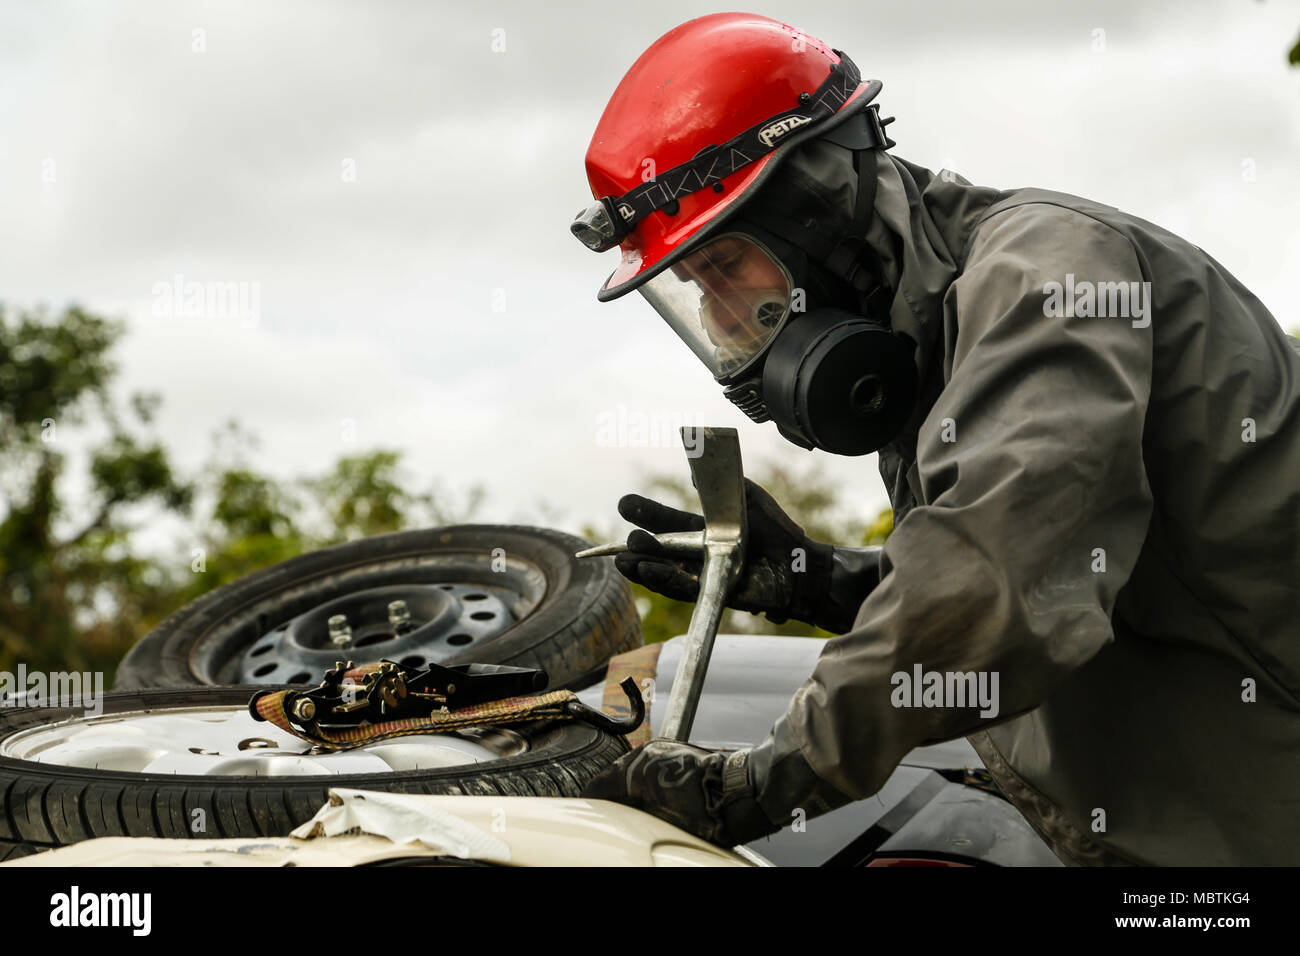 An U. S. Army Reserve soldier assigned to the 424th Engineer Company works in a Joint Training Exercise on the Miami-Dade Fire Rescue Urban Search and Rescue Training Site in Miami, Fla. Jan. 10, 2018. This JTE focused on building response capabilities and seamless transition between the local first responders and the follow-on support provided by the National Guard and Active duty soldiers. (U. S. Army Photo by Spc. Samantha Lewis) Stock Photo